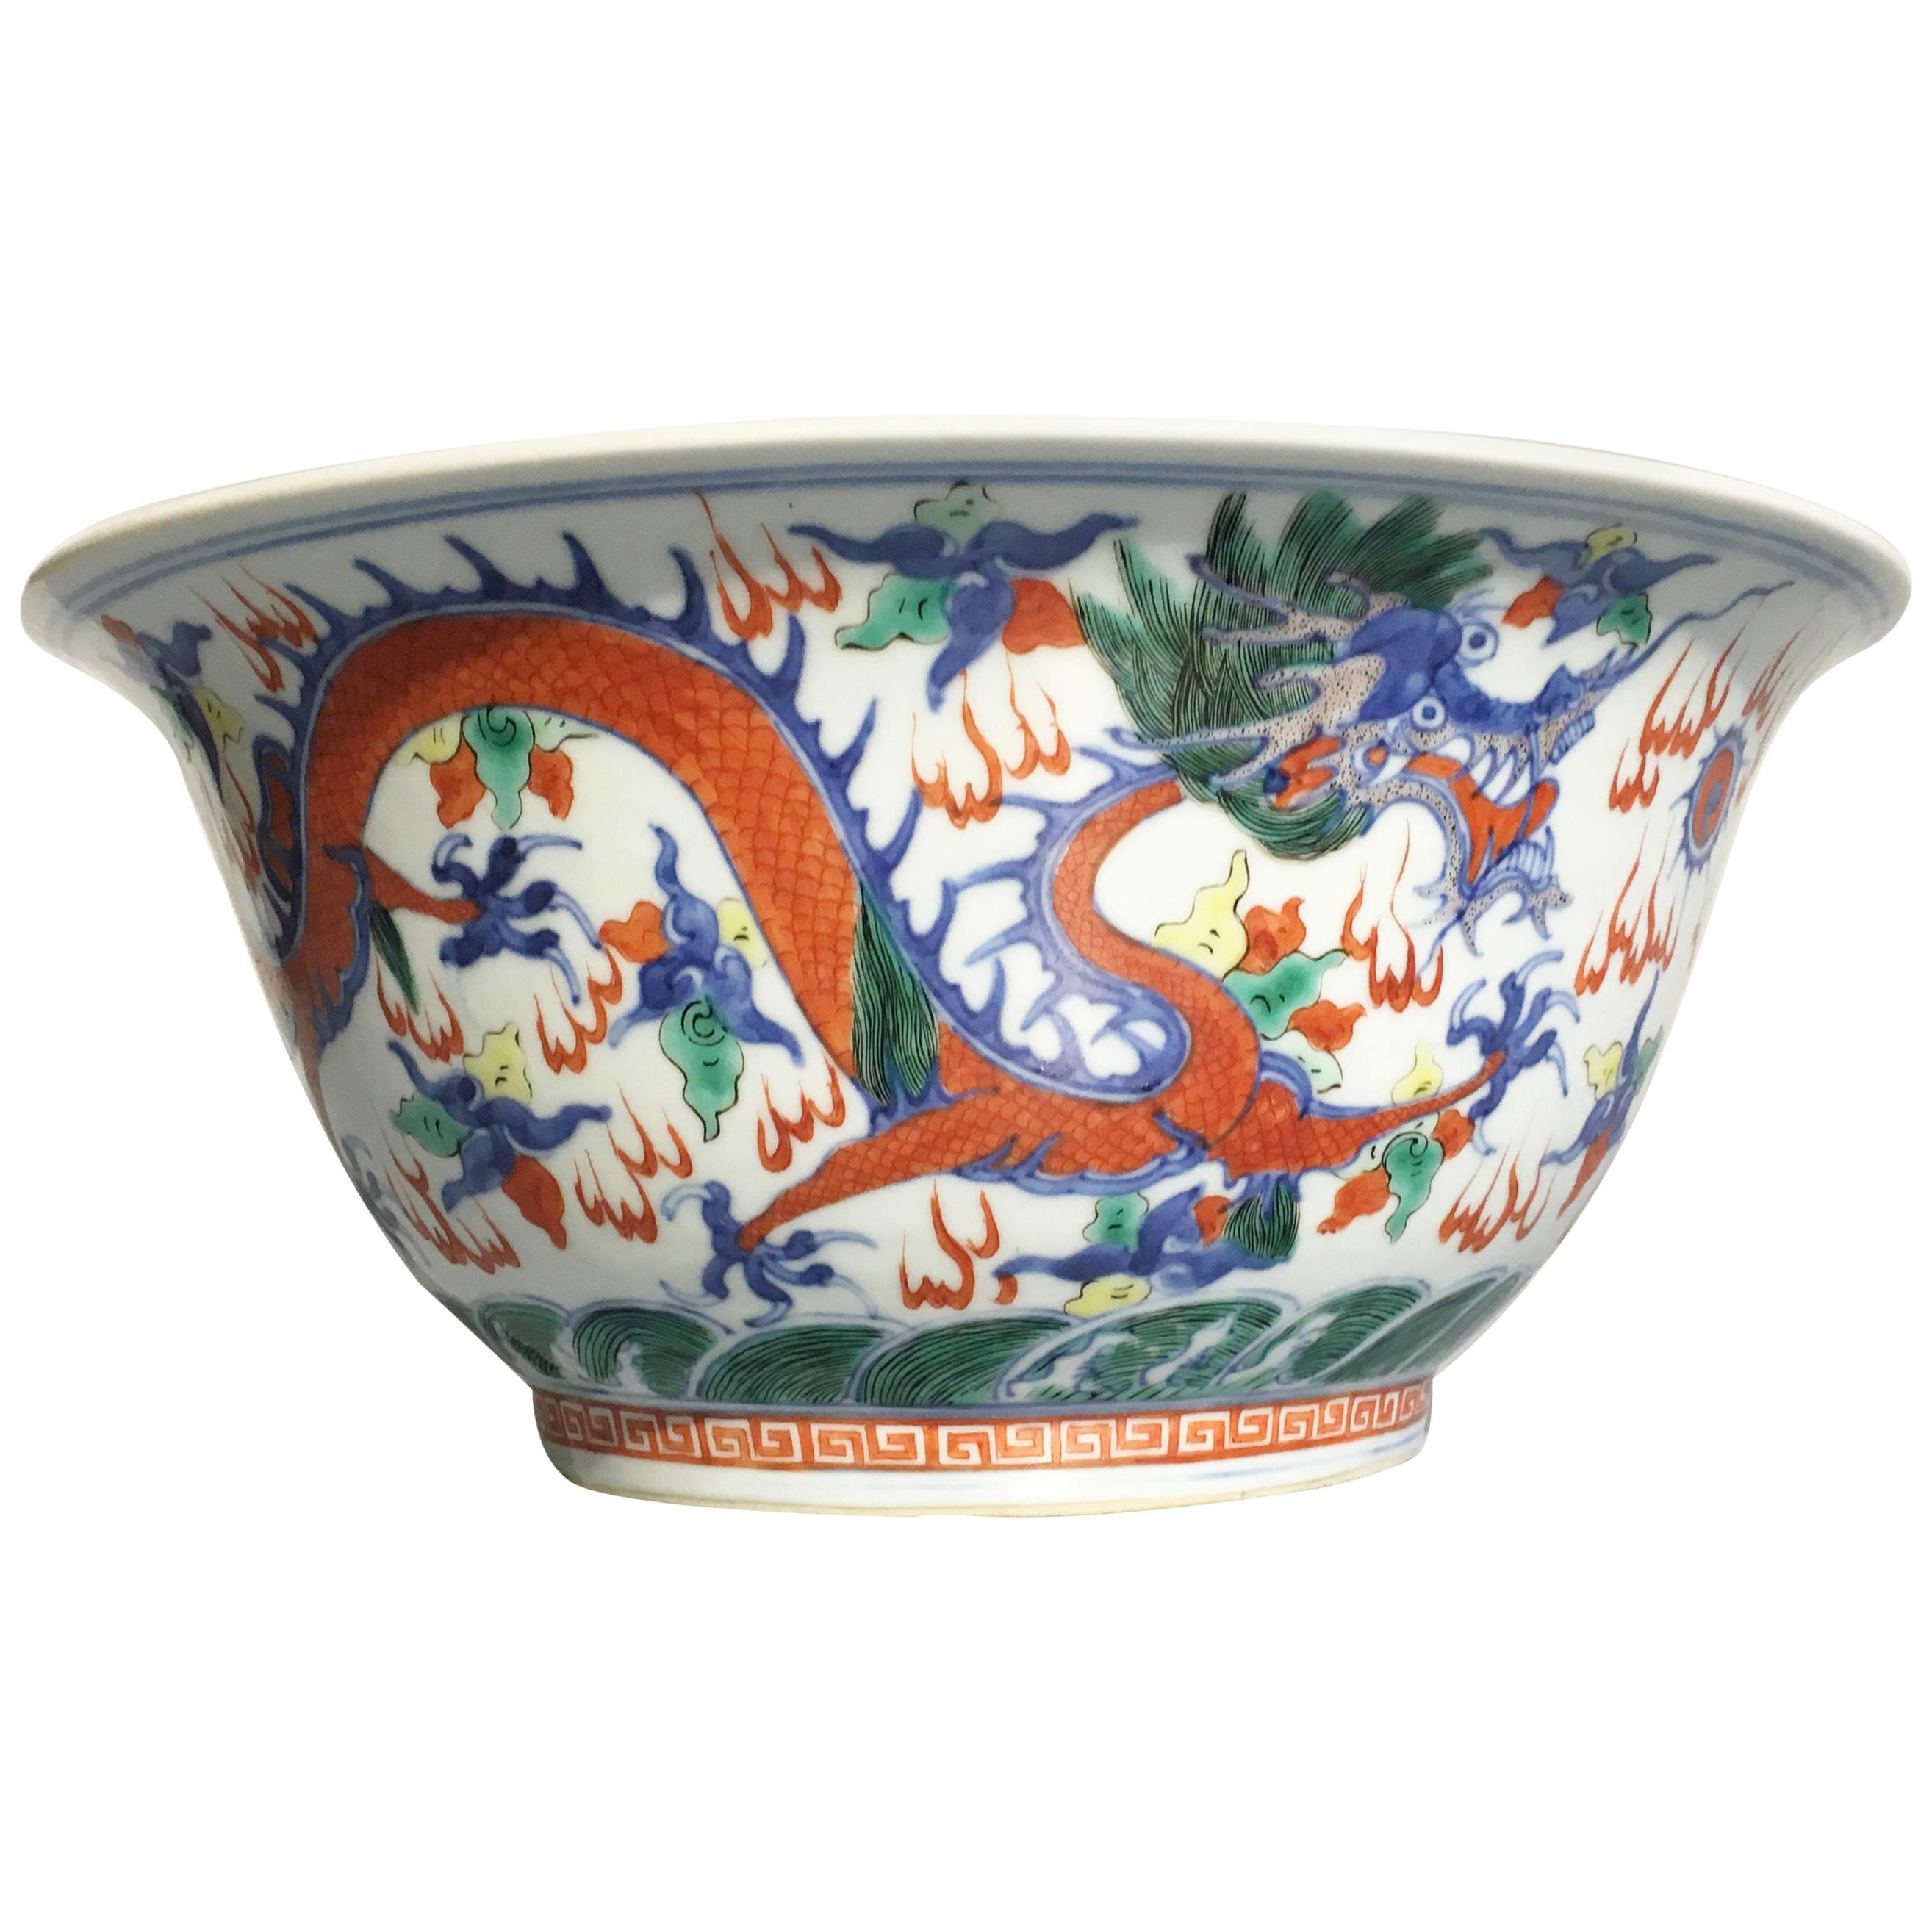 Large Chinese Qing Dynasty Wucai Porcelain Dragon Bowl, 19th Century